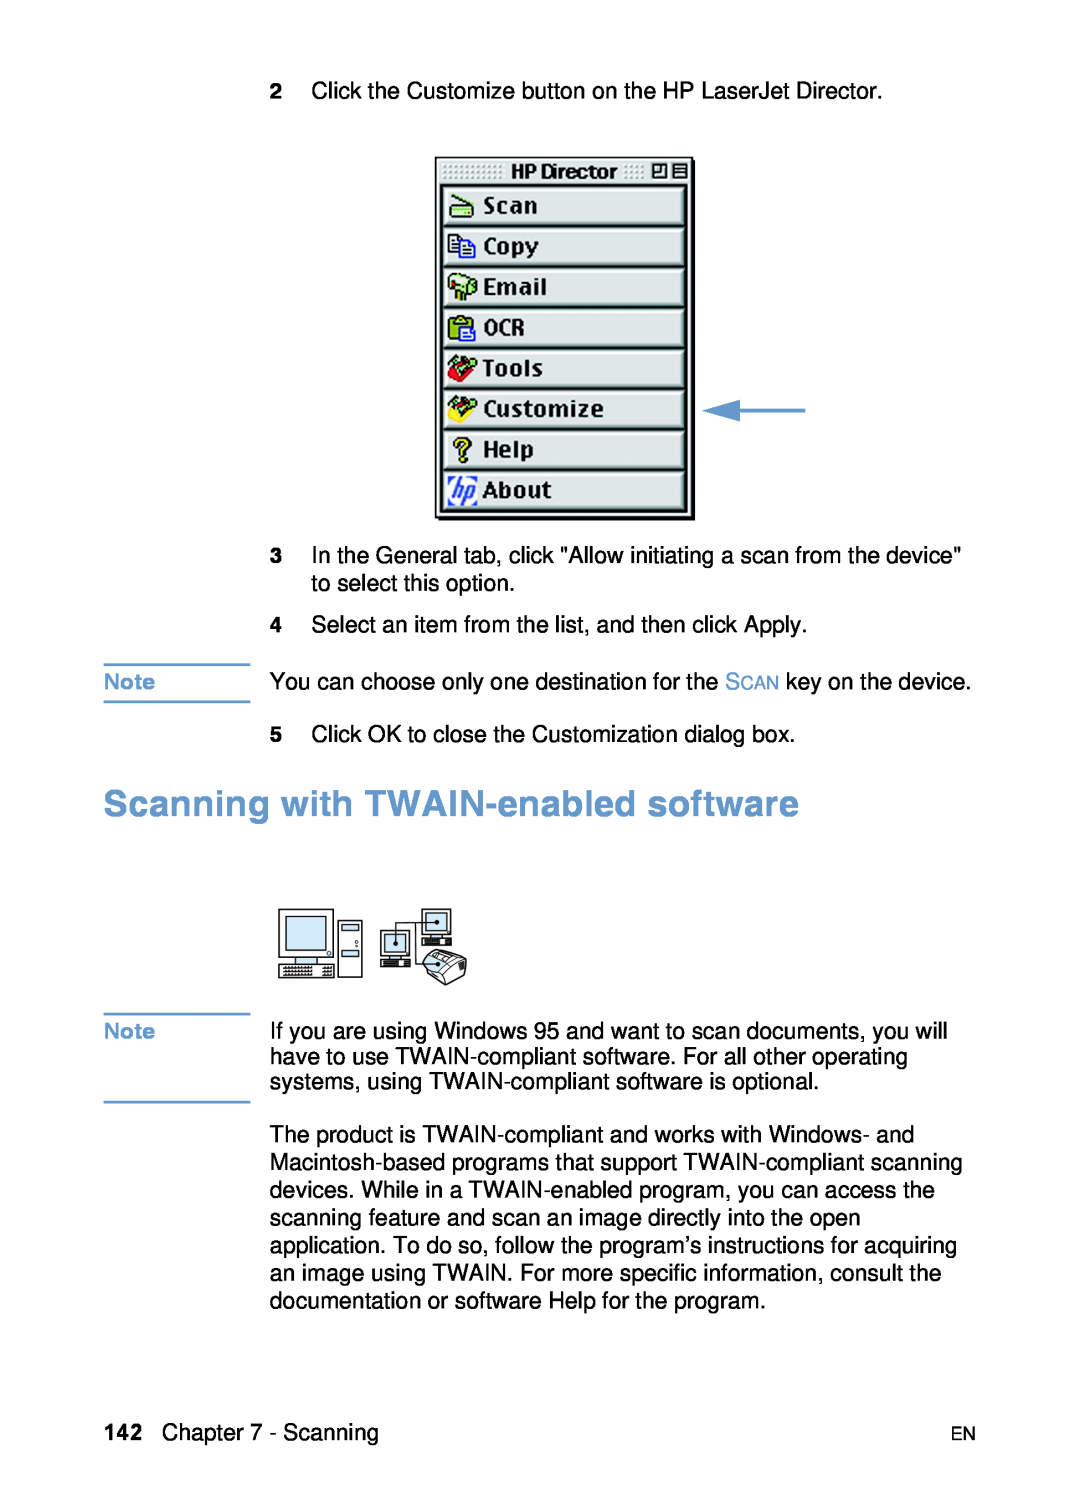 HP 3200 manual Scanning with TWAIN-enabled software 